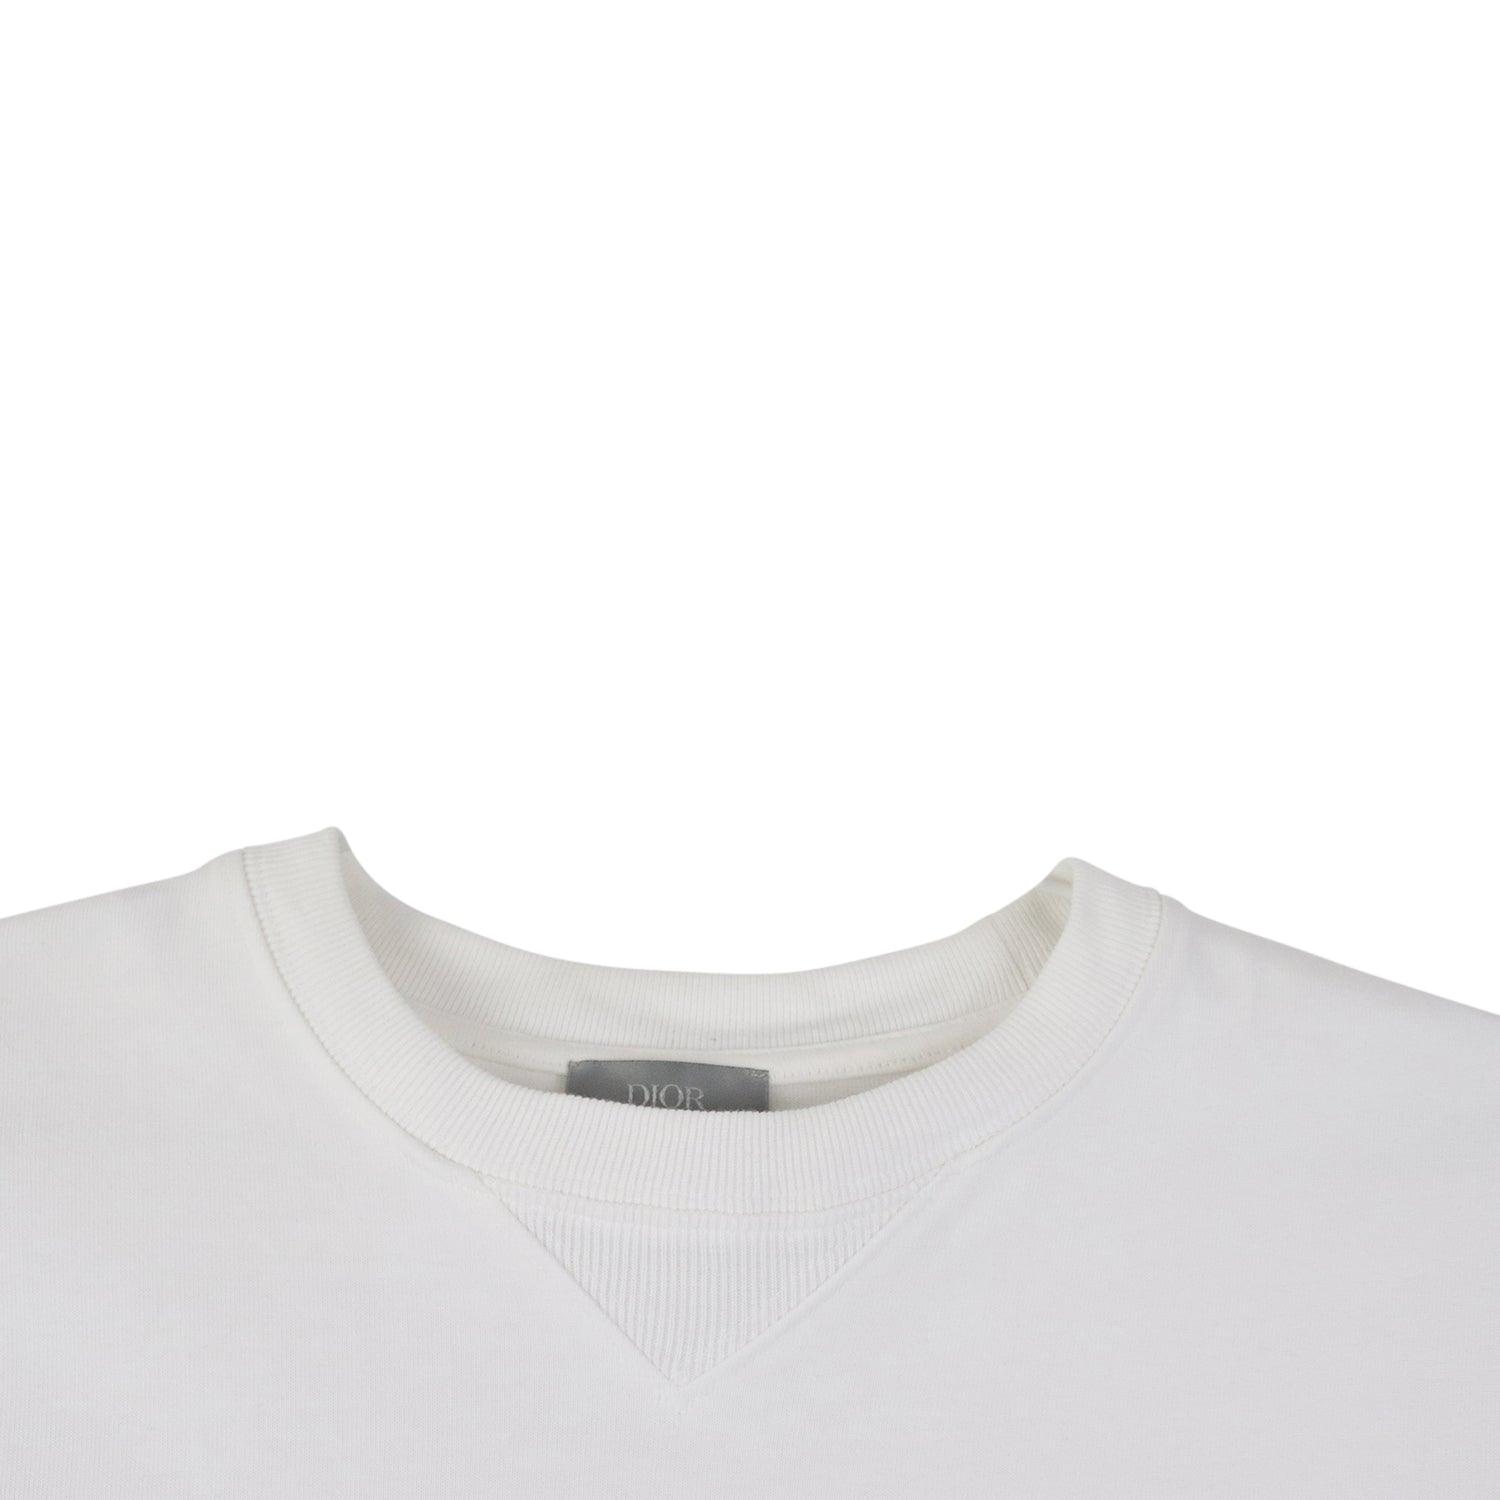 Christian Dior T-Shirt - Men's S - Fashionably Yours